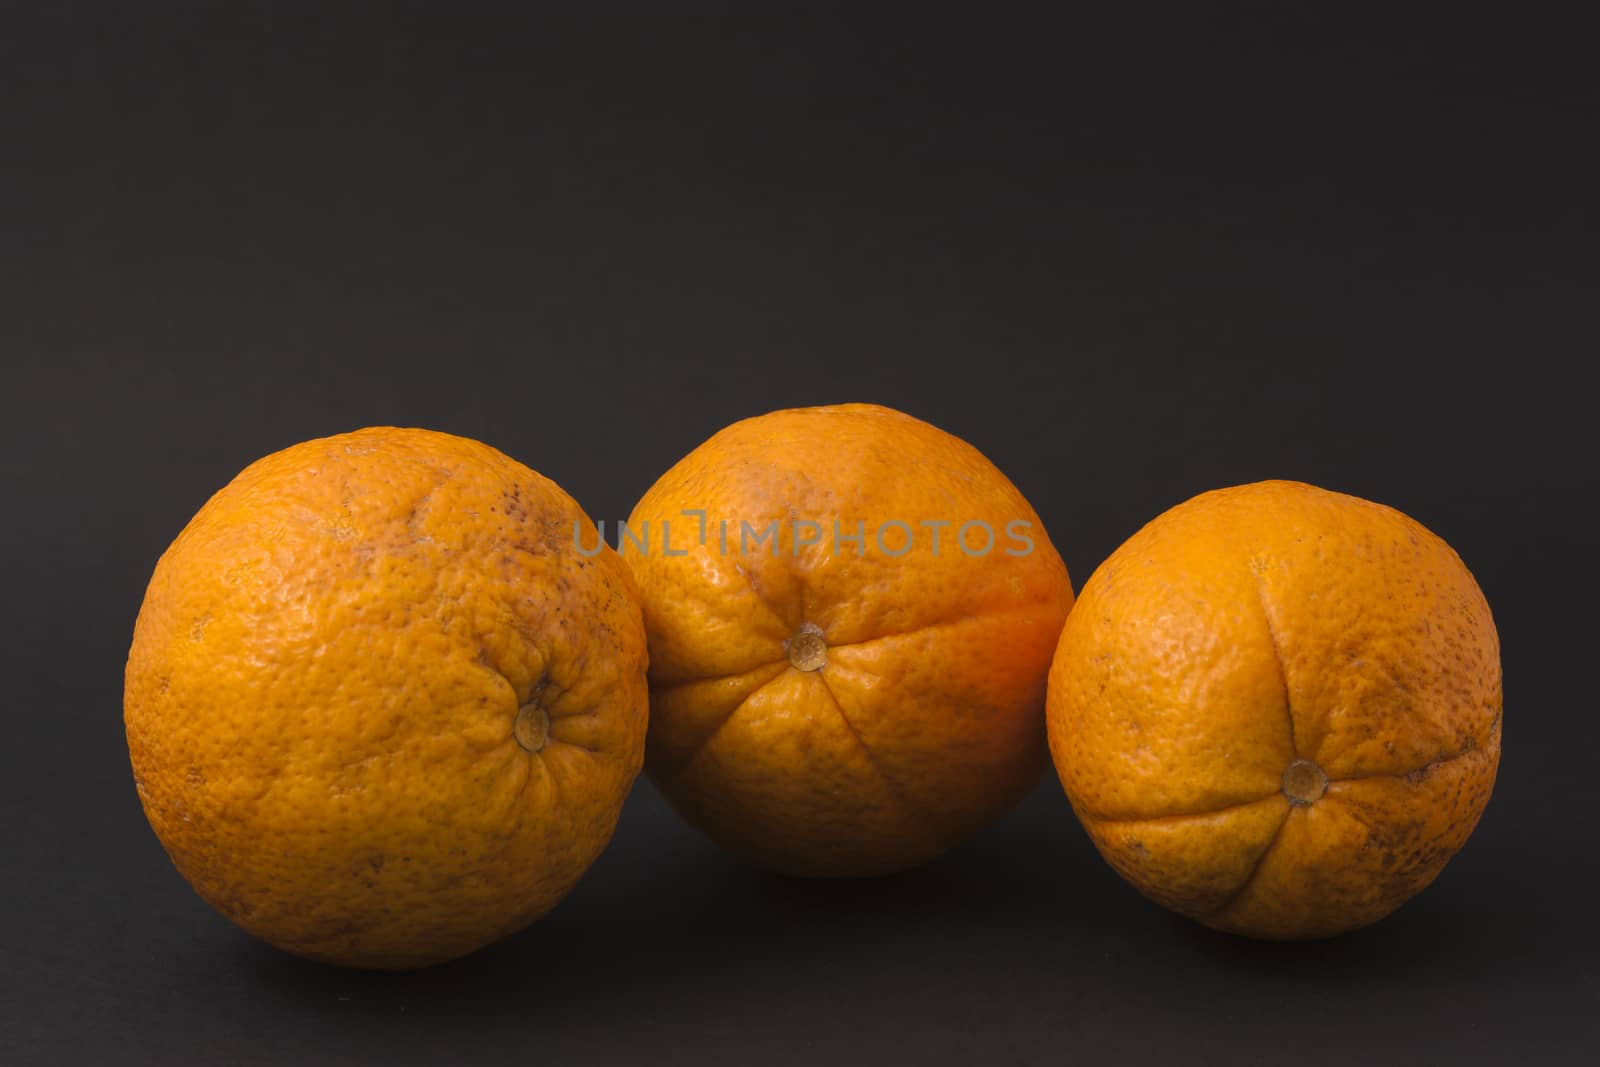 Three oranges on a black background to understand a concept for healthy eating